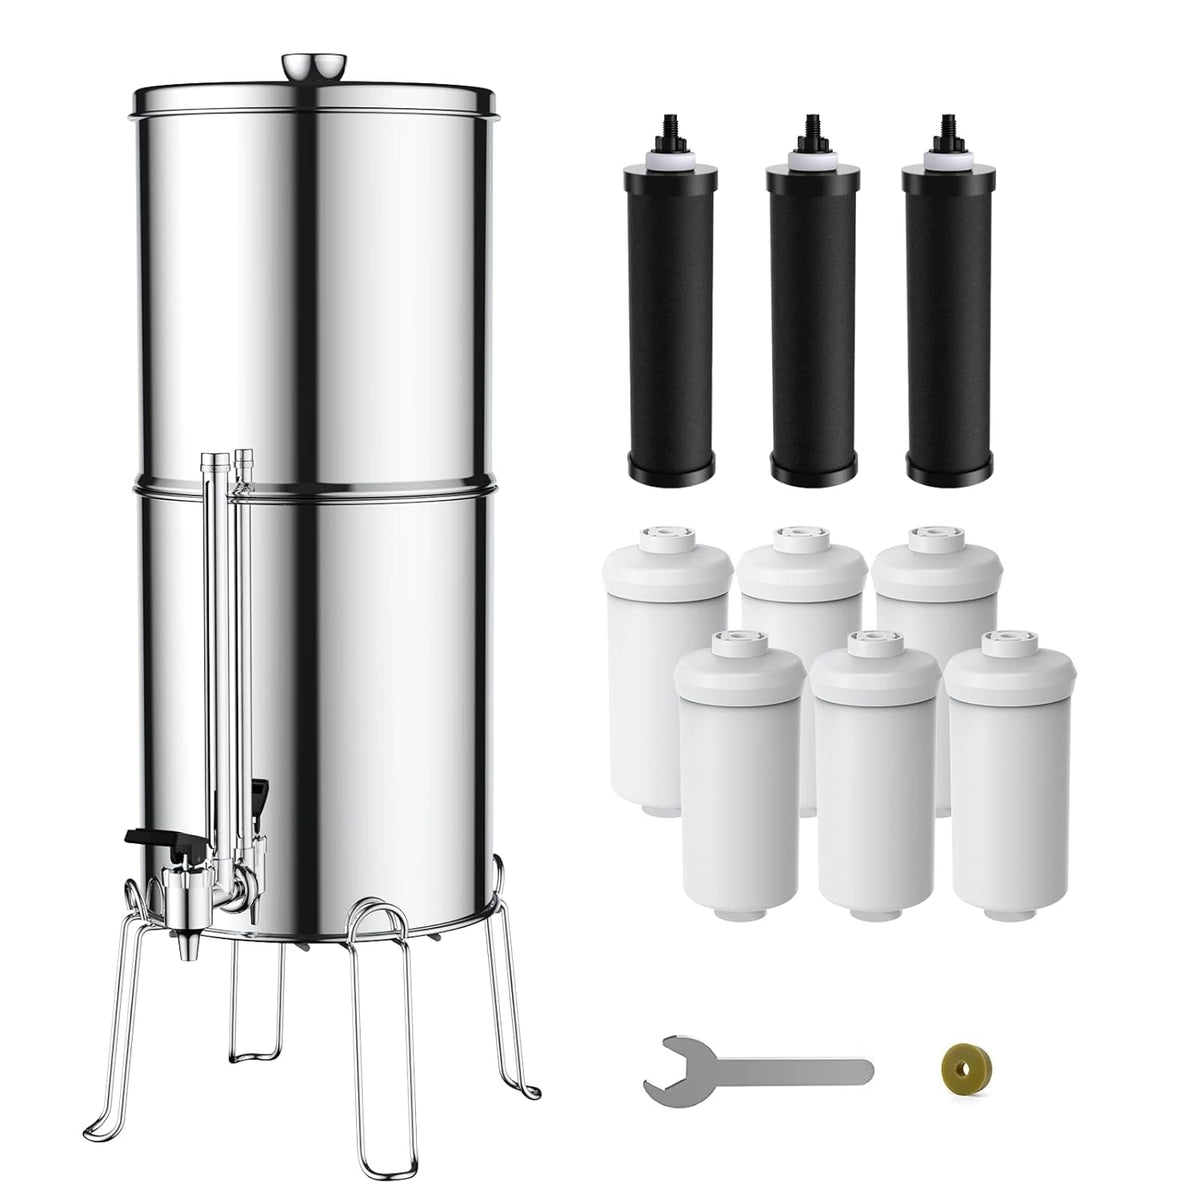 Glacier Fresh Gravity-fed Water Filter System, 3G Stainless-Steel